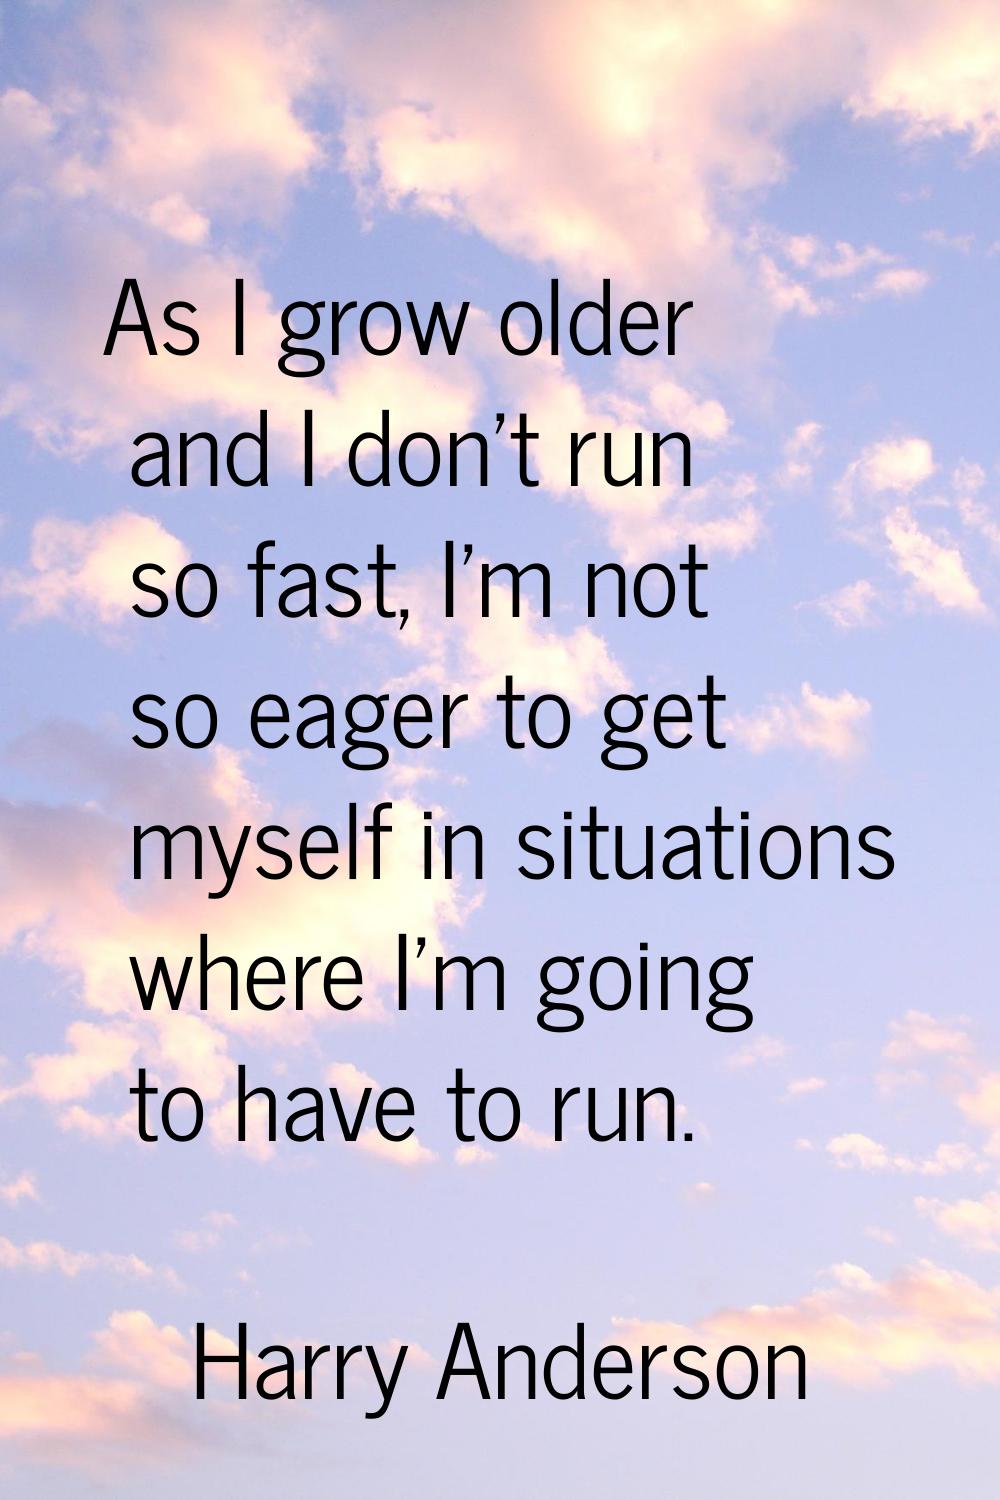 As I grow older and I don't run so fast, I'm not so eager to get myself in situations where I'm goi